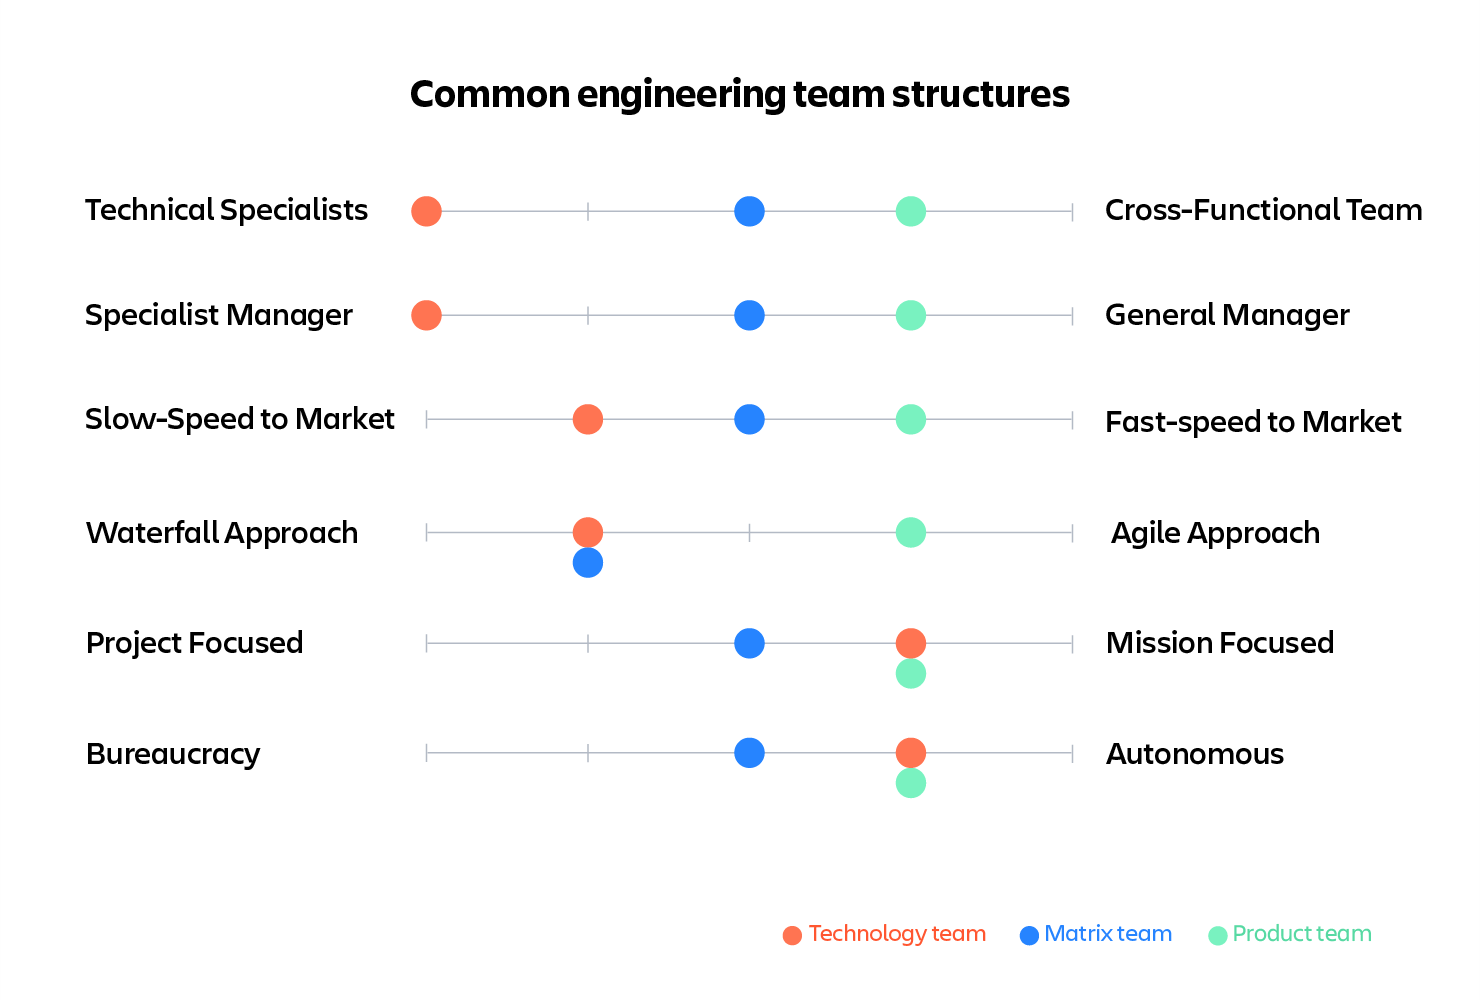 How should you structure your engineering team?